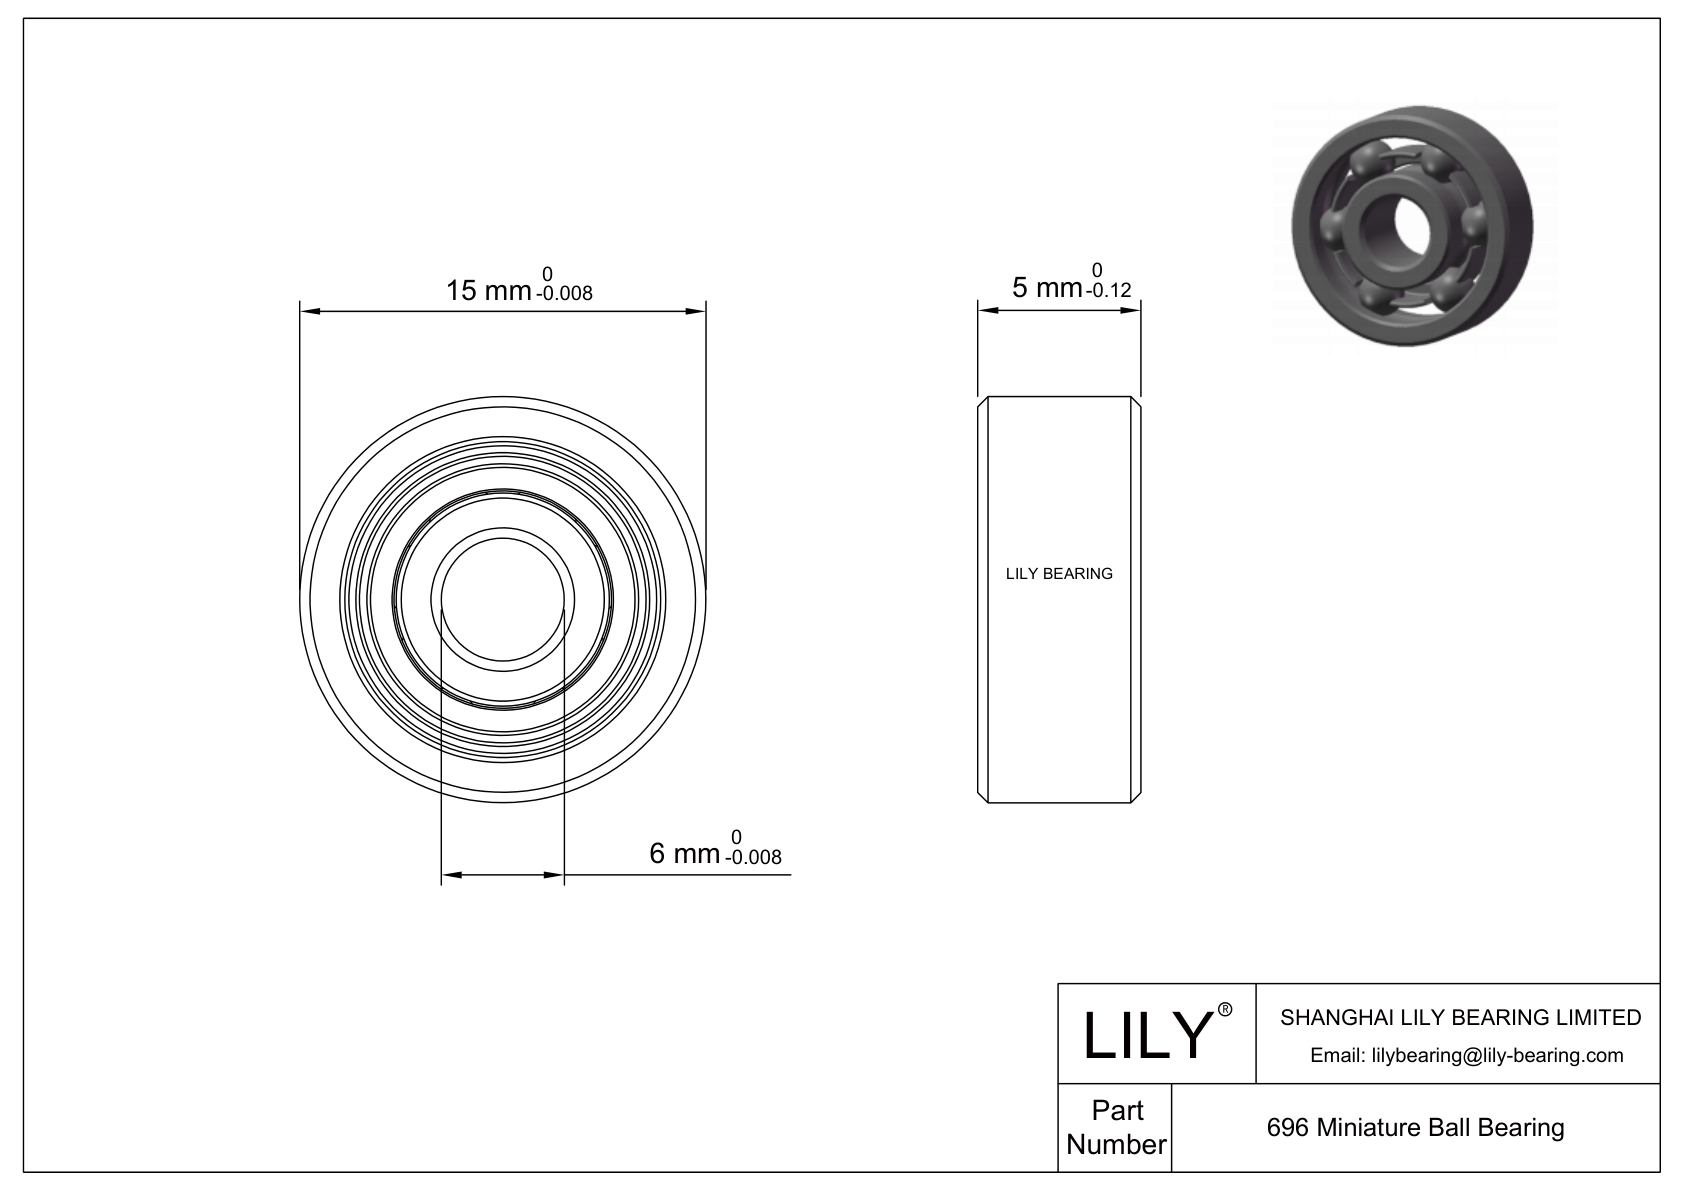 LILY-PU69618-7C1L8M6 Polyurethane Coated Bearing With Screw cad drawing